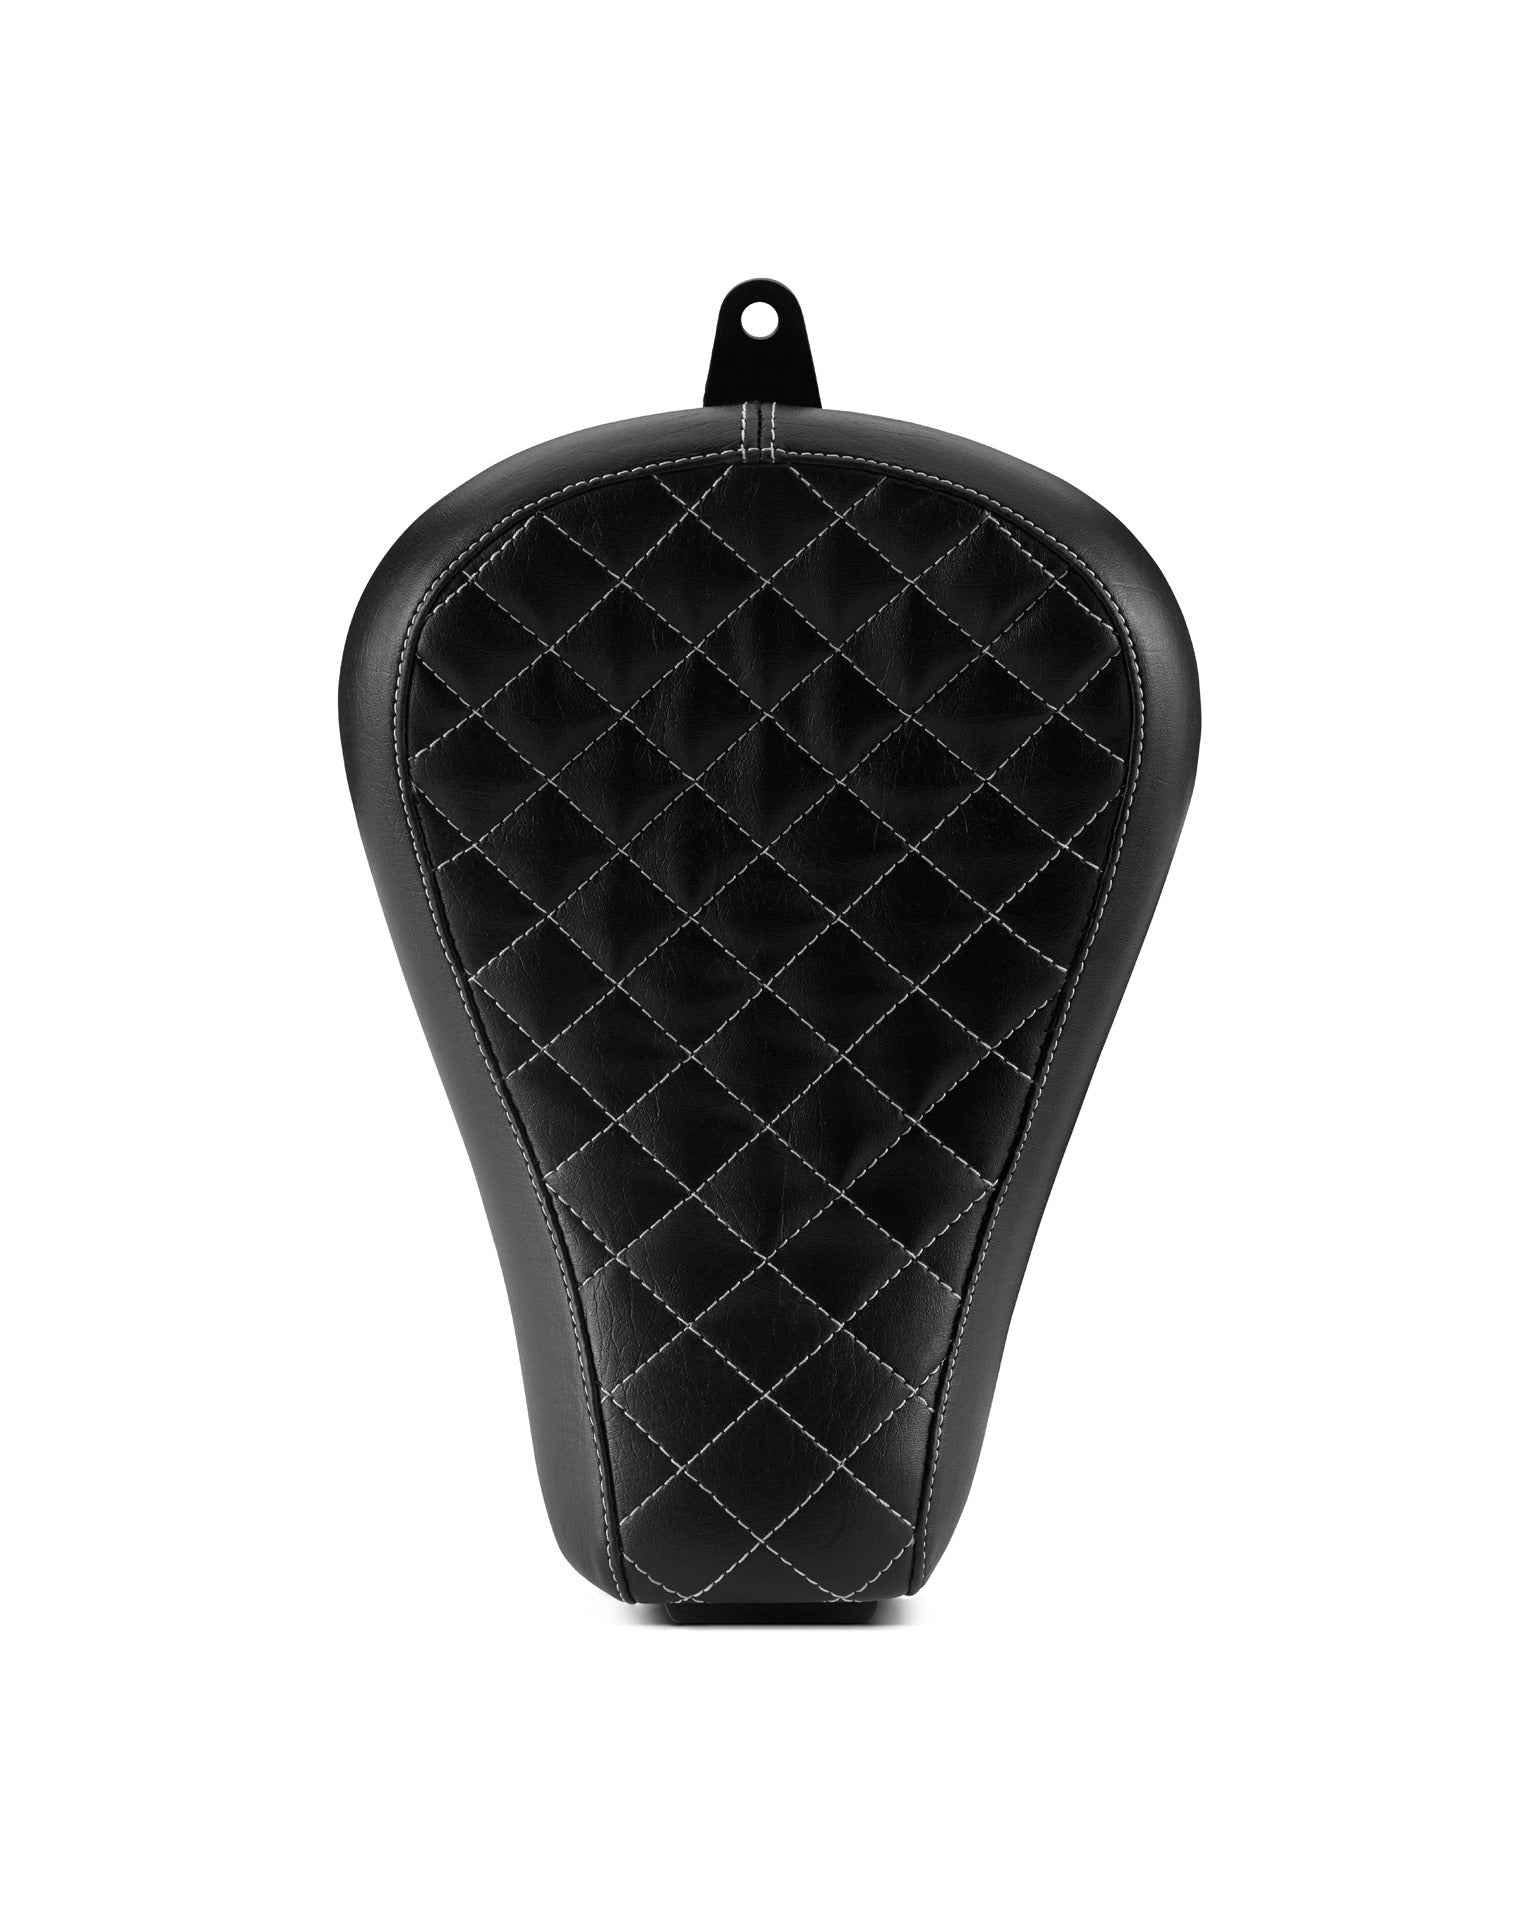 Viking Iron Born White Diamond Stitch Motorcycle Solo Seat for Harley Sportster 1200 Custom XL1200C Front View